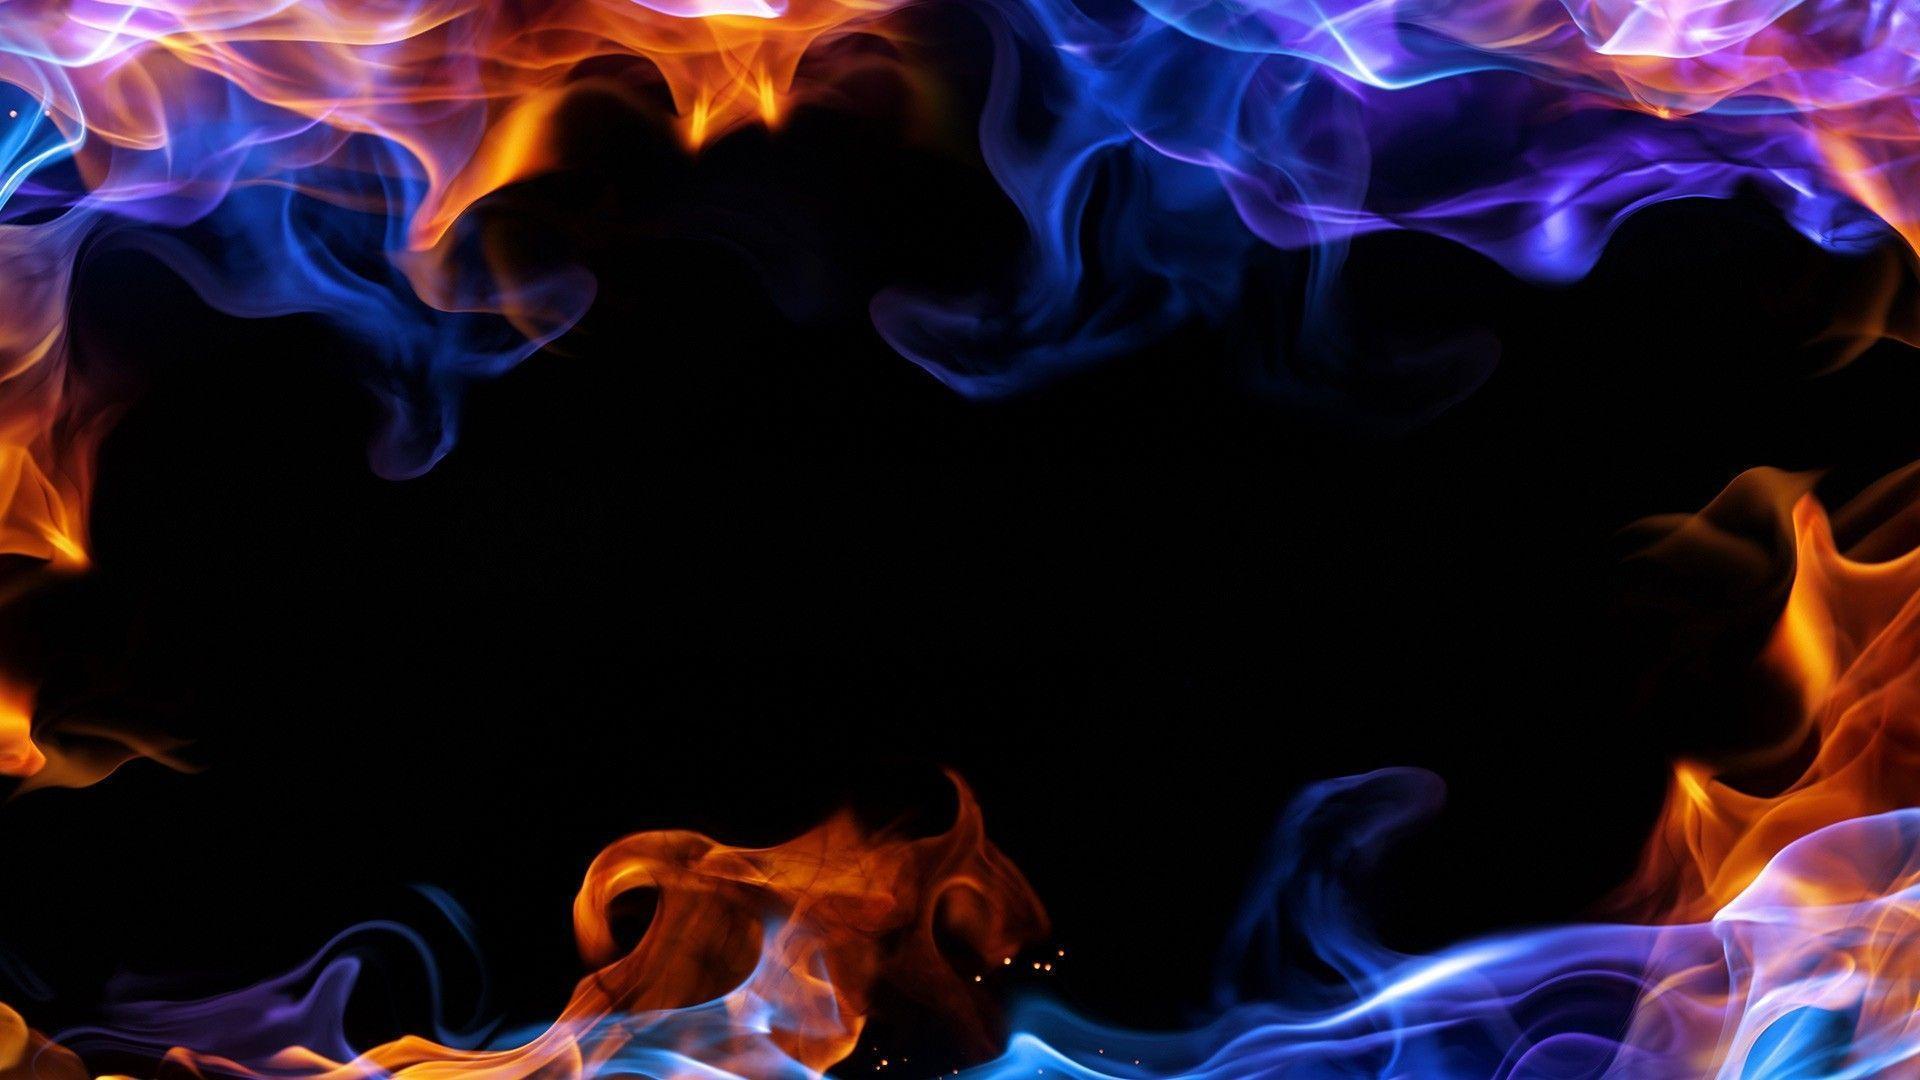 Fire Background Images - Wallpaper Cave